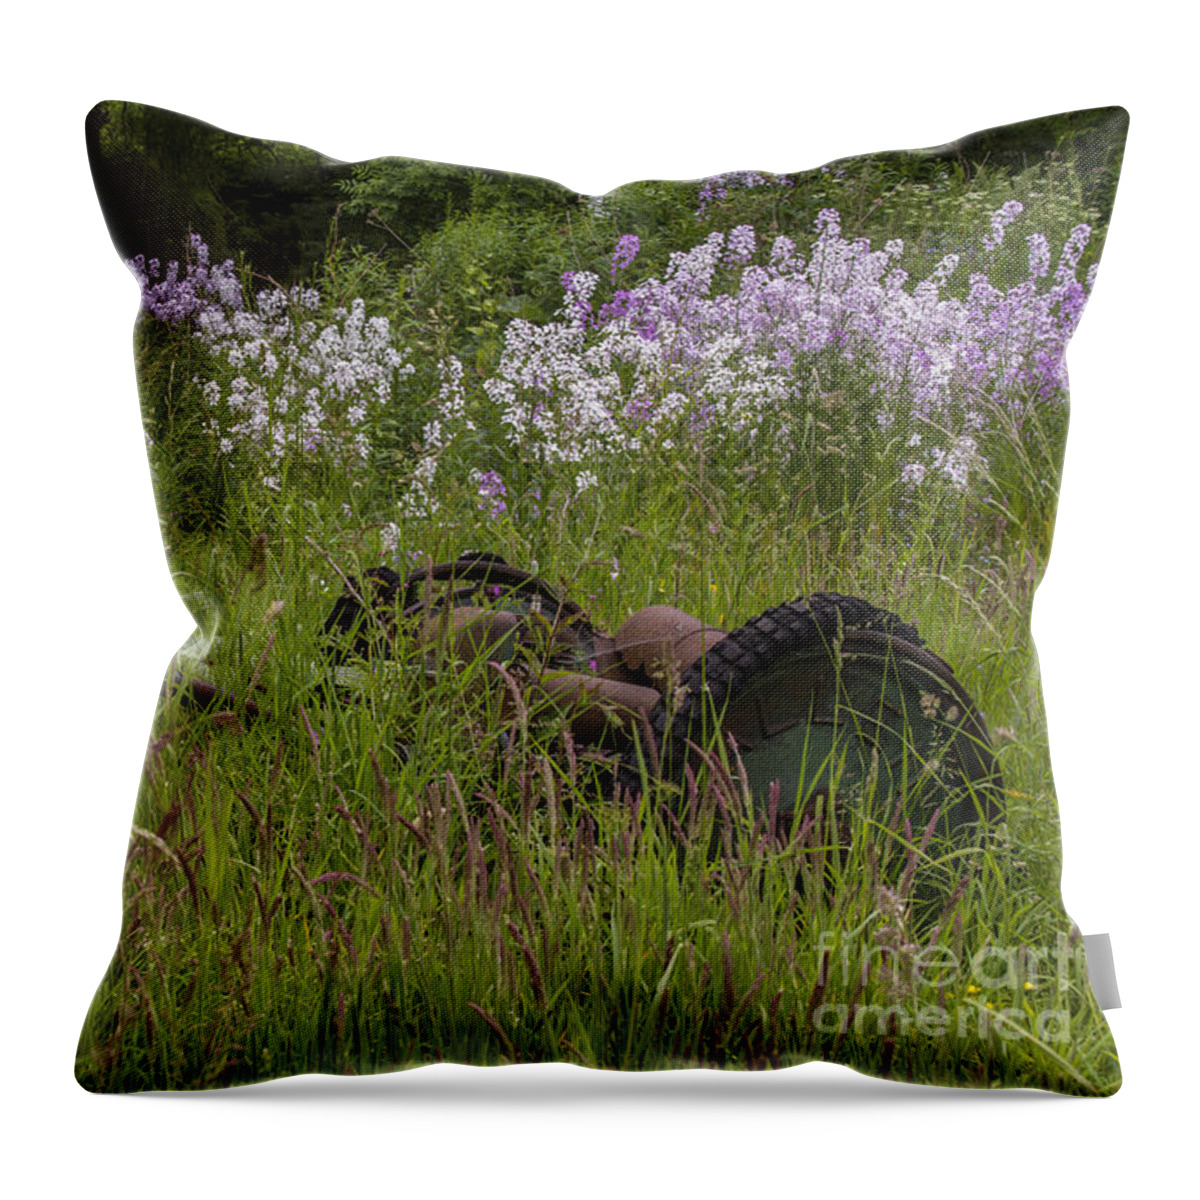 Rusted Machinery Throw Pillow featuring the photograph Rust In The Meadows by Sandra Cockayne ADPS